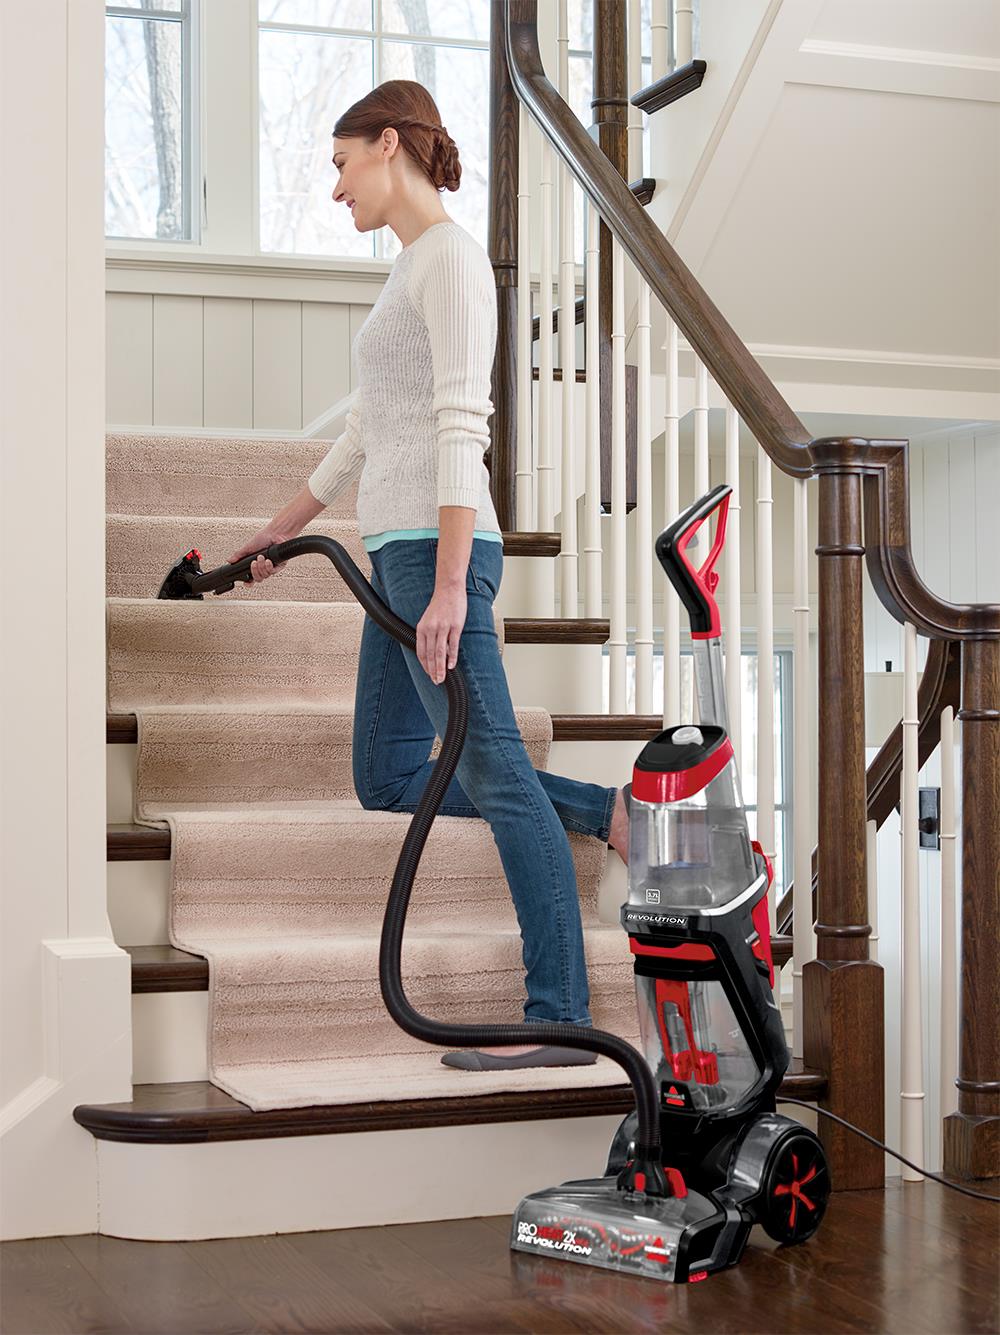 Bissell ProHeat 2 x Revolution 18583 Upright Carpet Cleaner